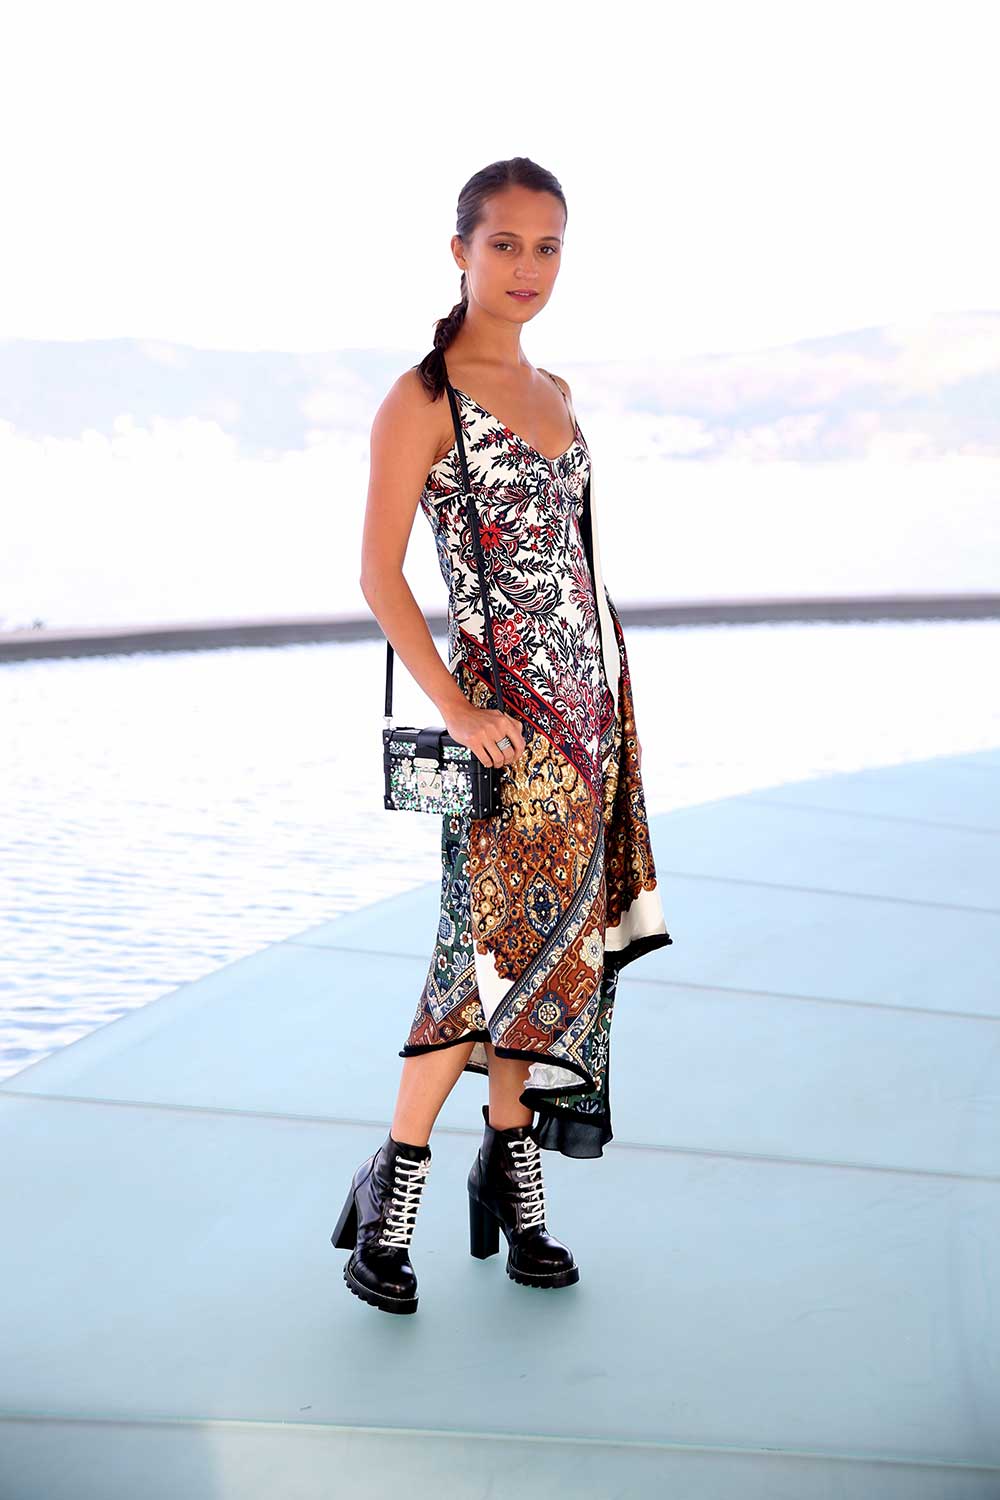 Louis Vuitton's Cruise Front Row Featured This Unexpected Boot